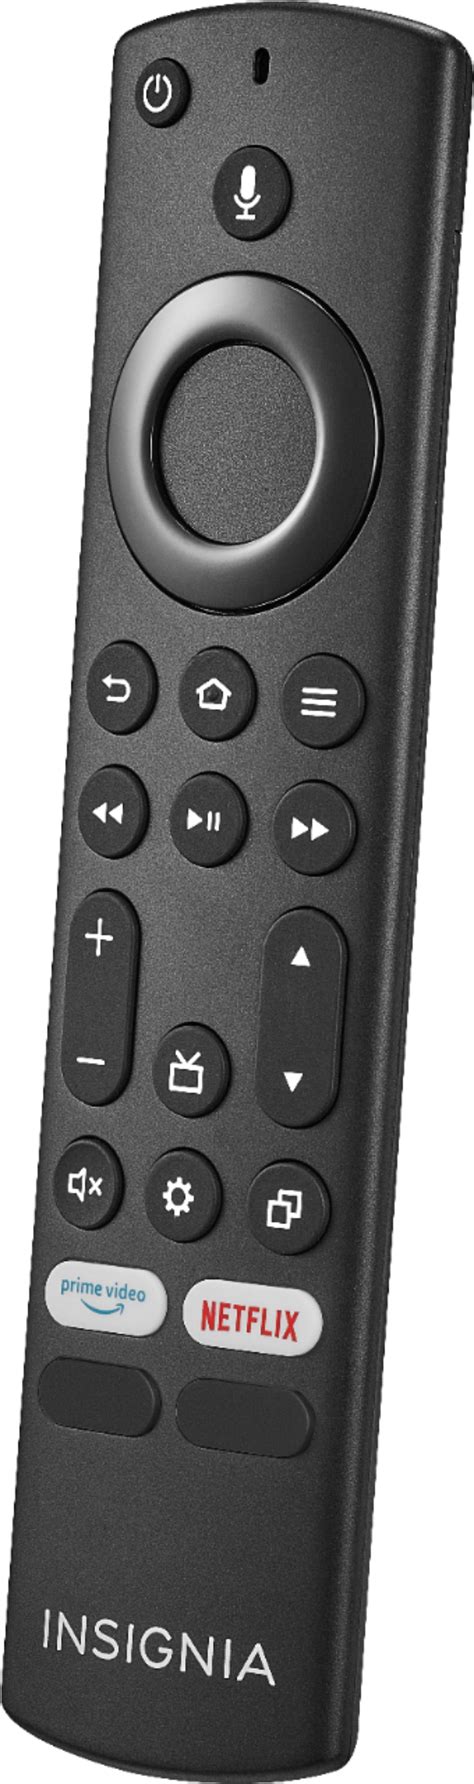 questions  answers insignia replacement tv remote  insignia  toshiba fire tv edition